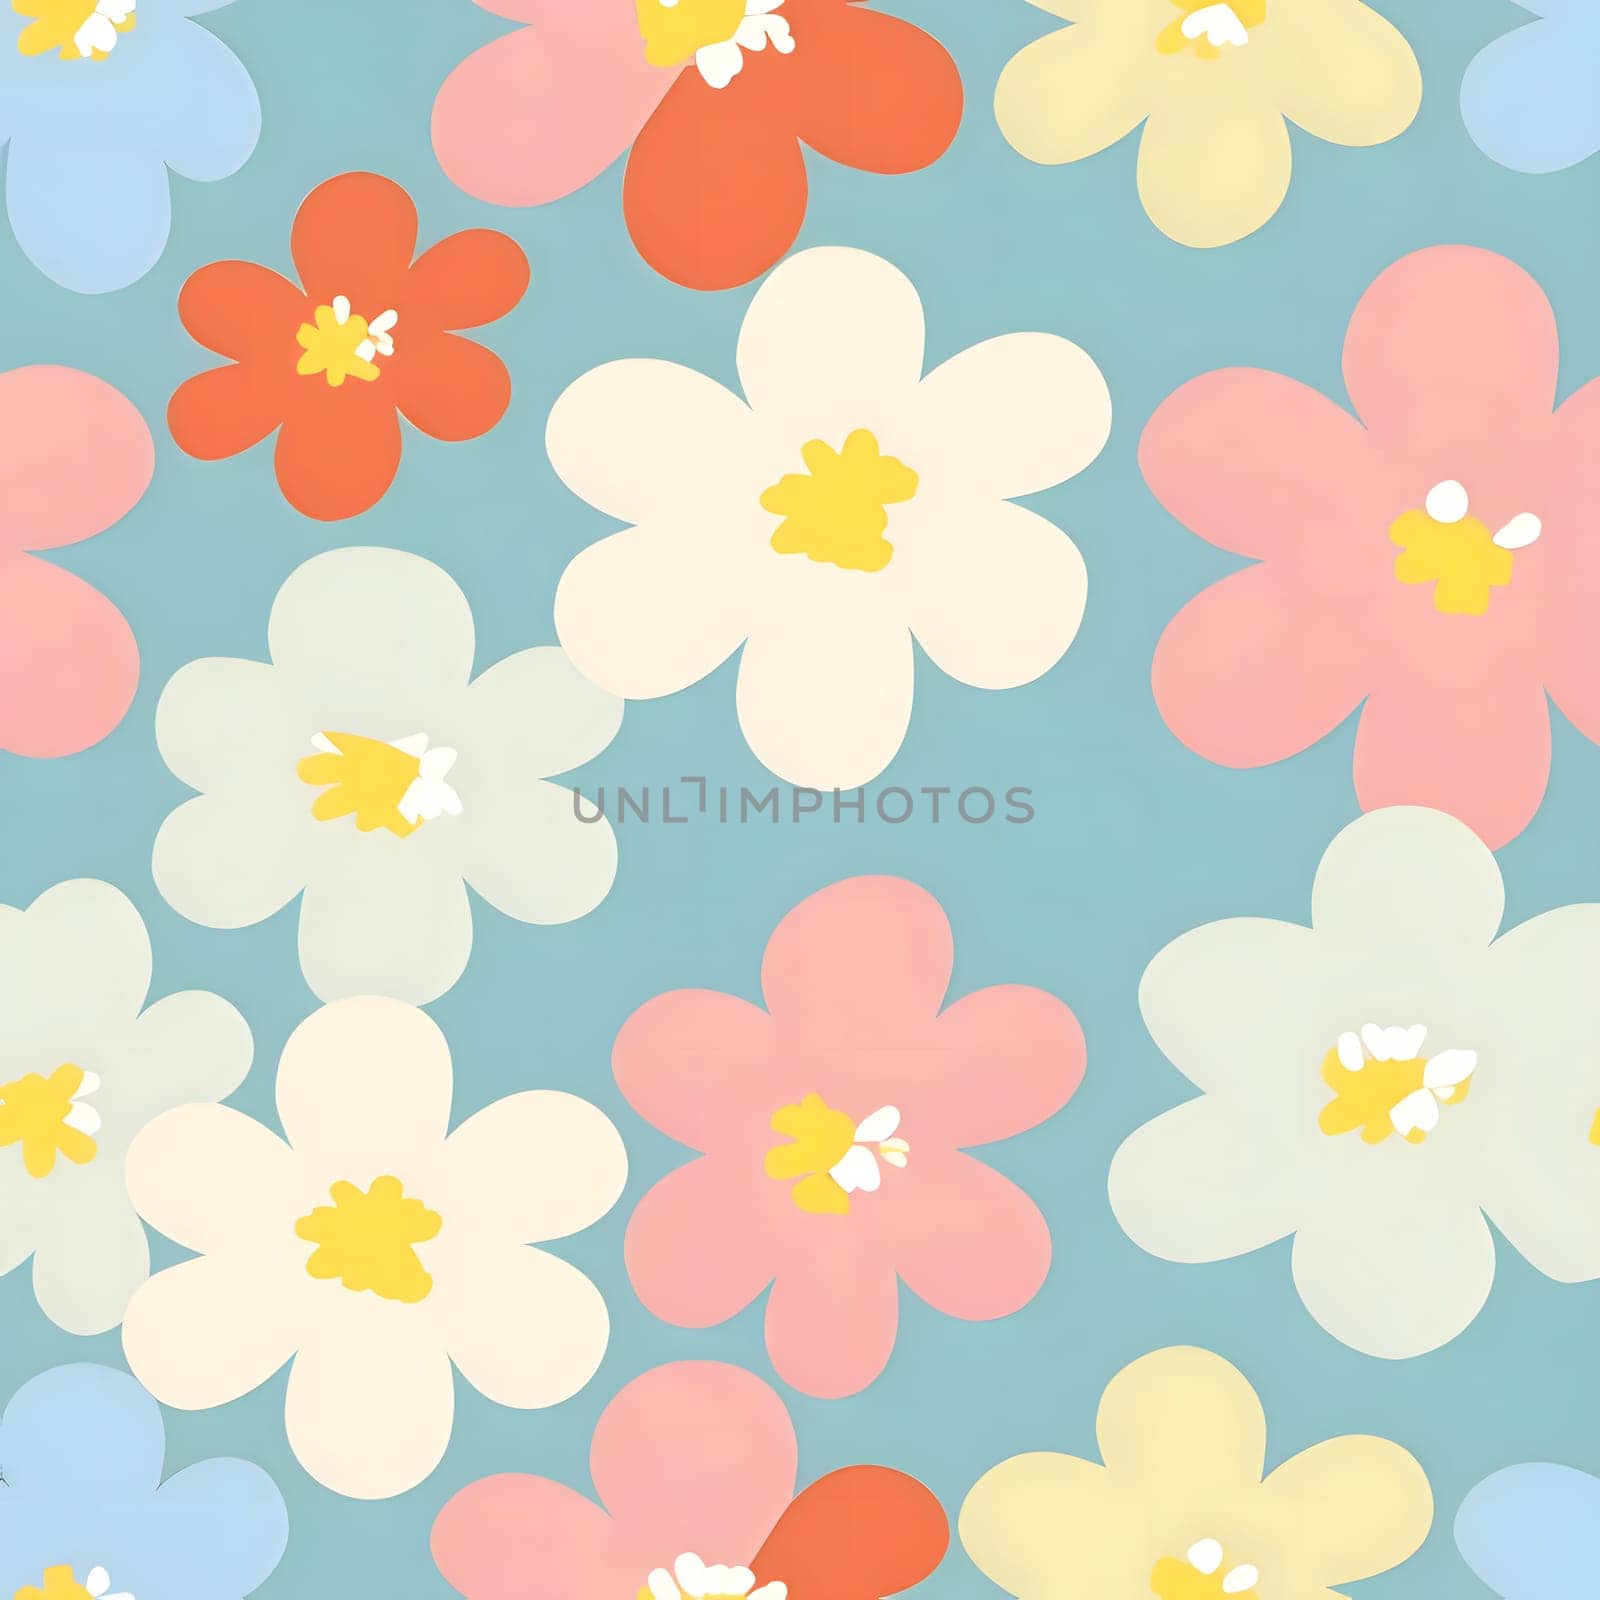 Patterns and banners backgrounds: Seamless pattern with flowers in retro style. Vector illustration.